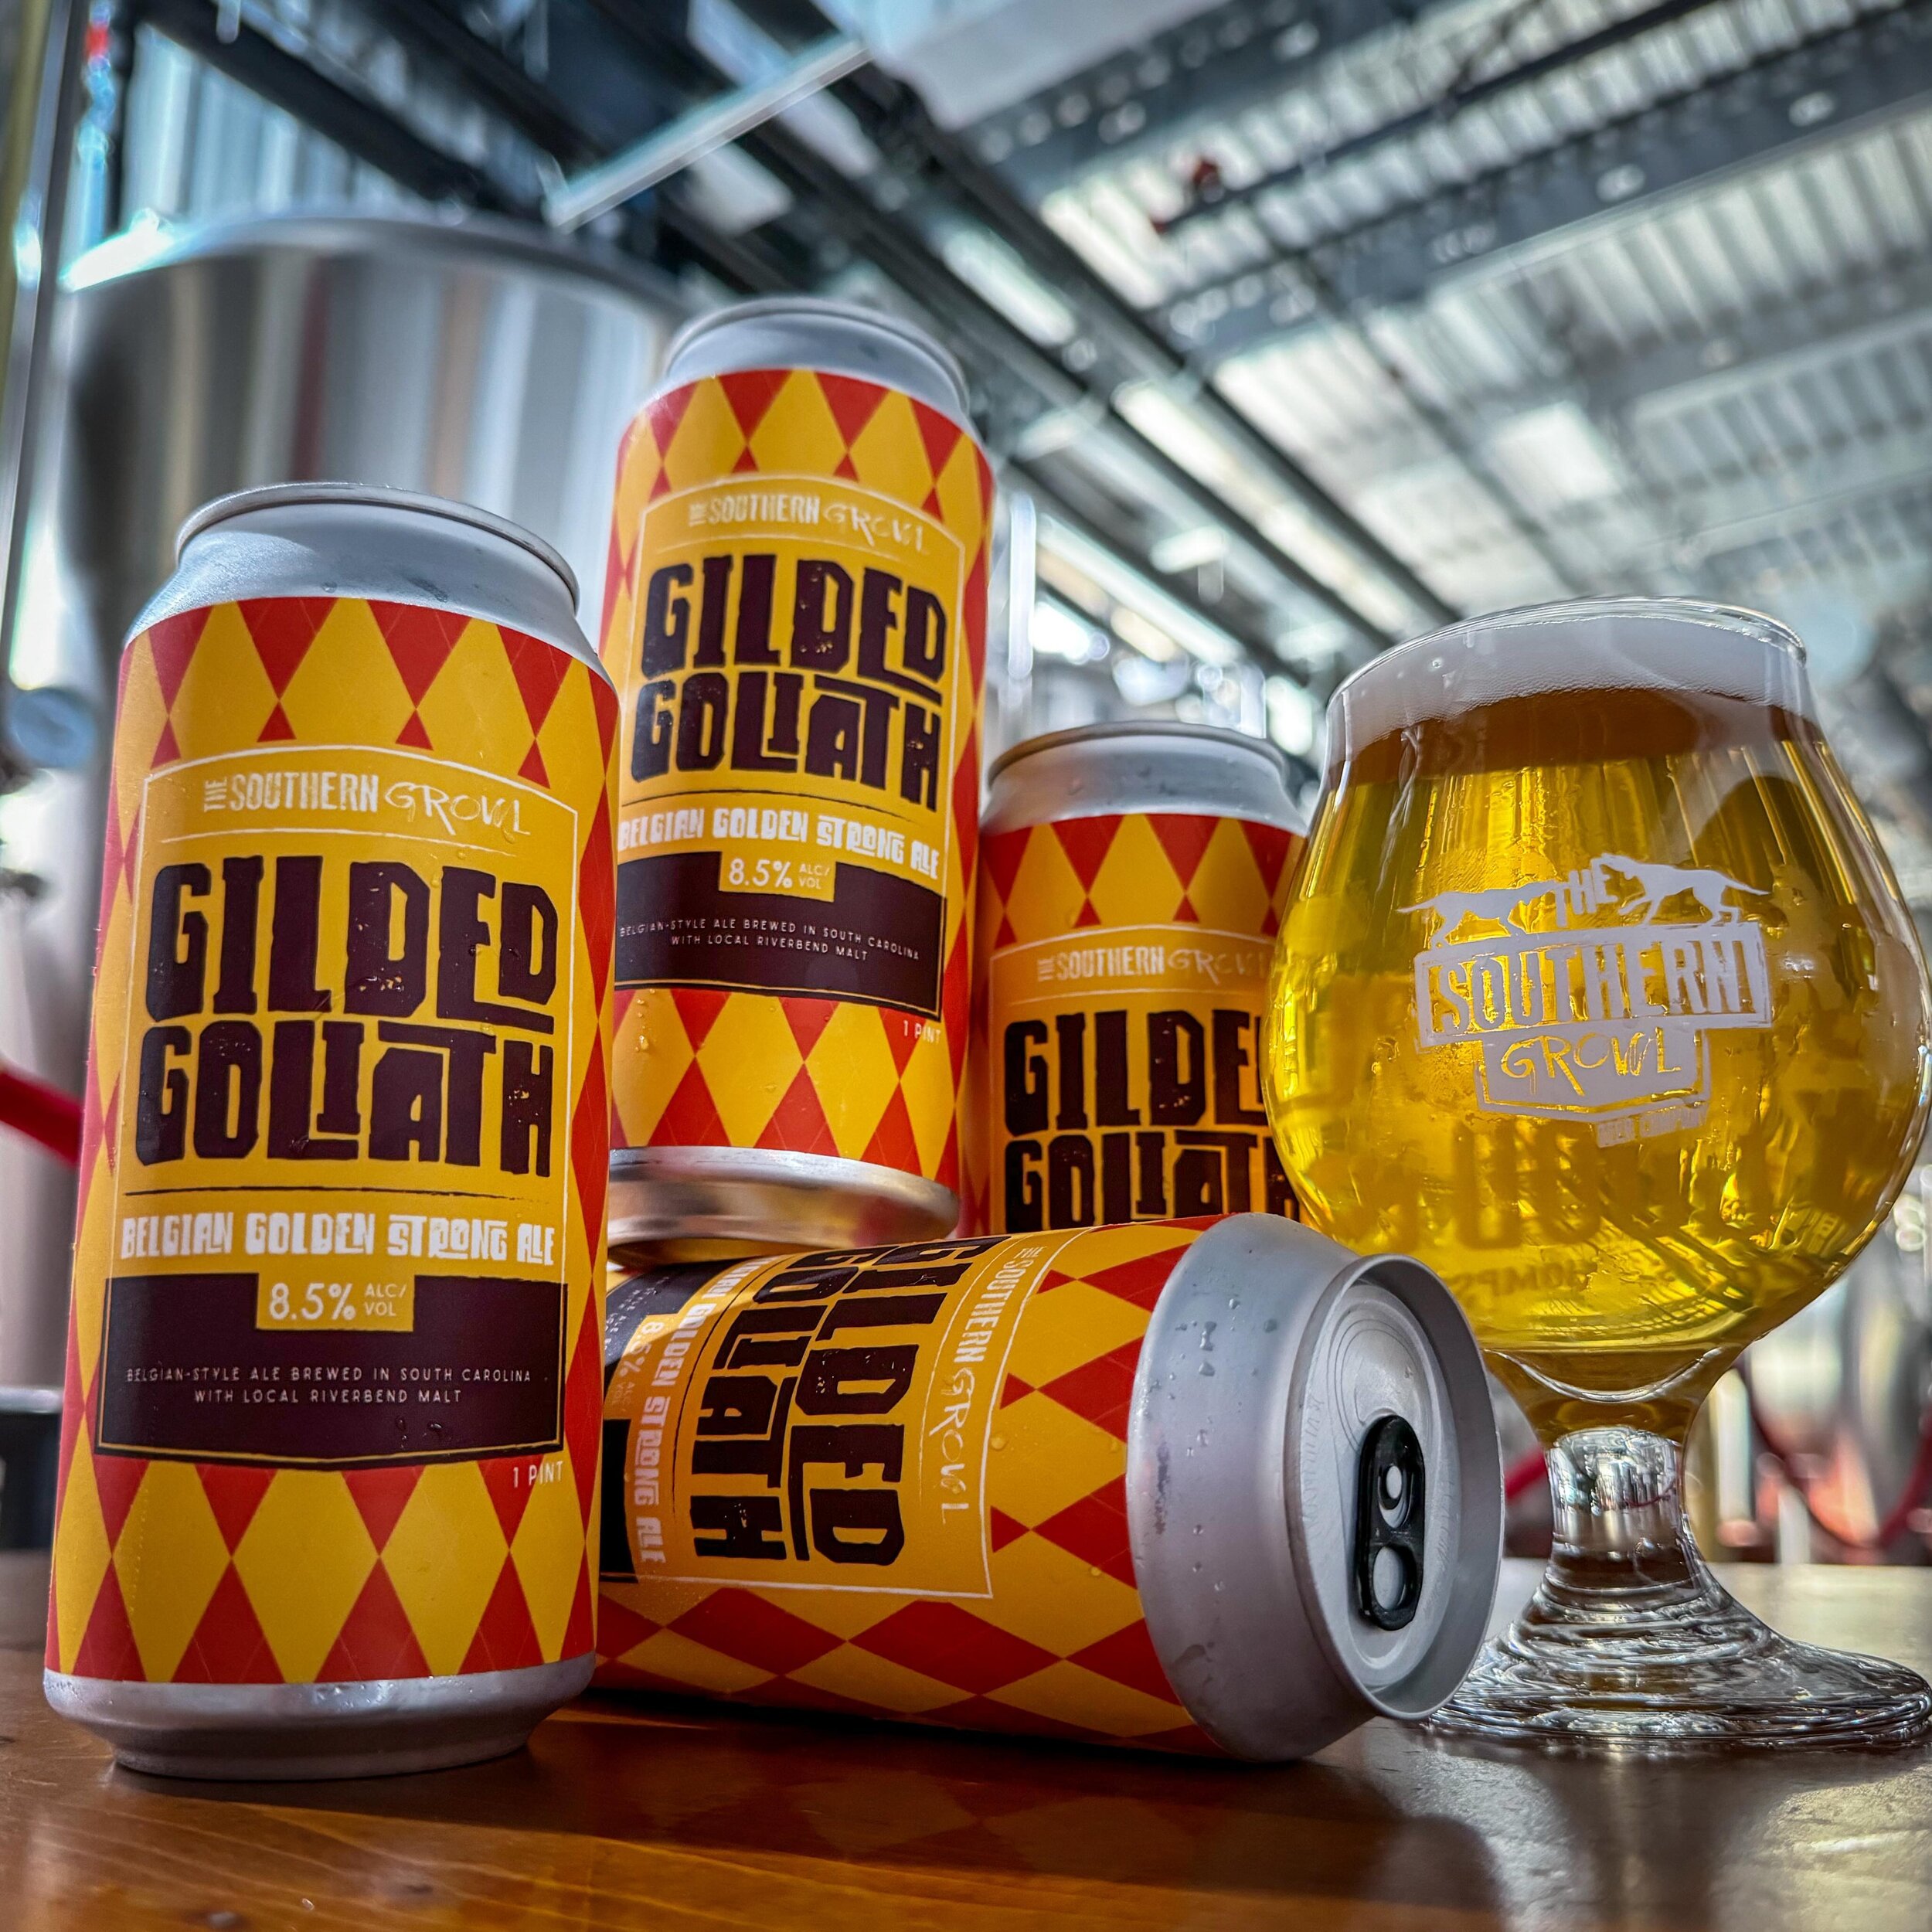 GILDED GOLIATH 
Strong but nuanced, this golden giant balances intensity with delicacy, juxtaposing alcohol warmth with lively effervescence and flavors of Anjou pear, geranium, and white peppercorn. 
Belgian Golden Strong 8.5% 

Available now on dra